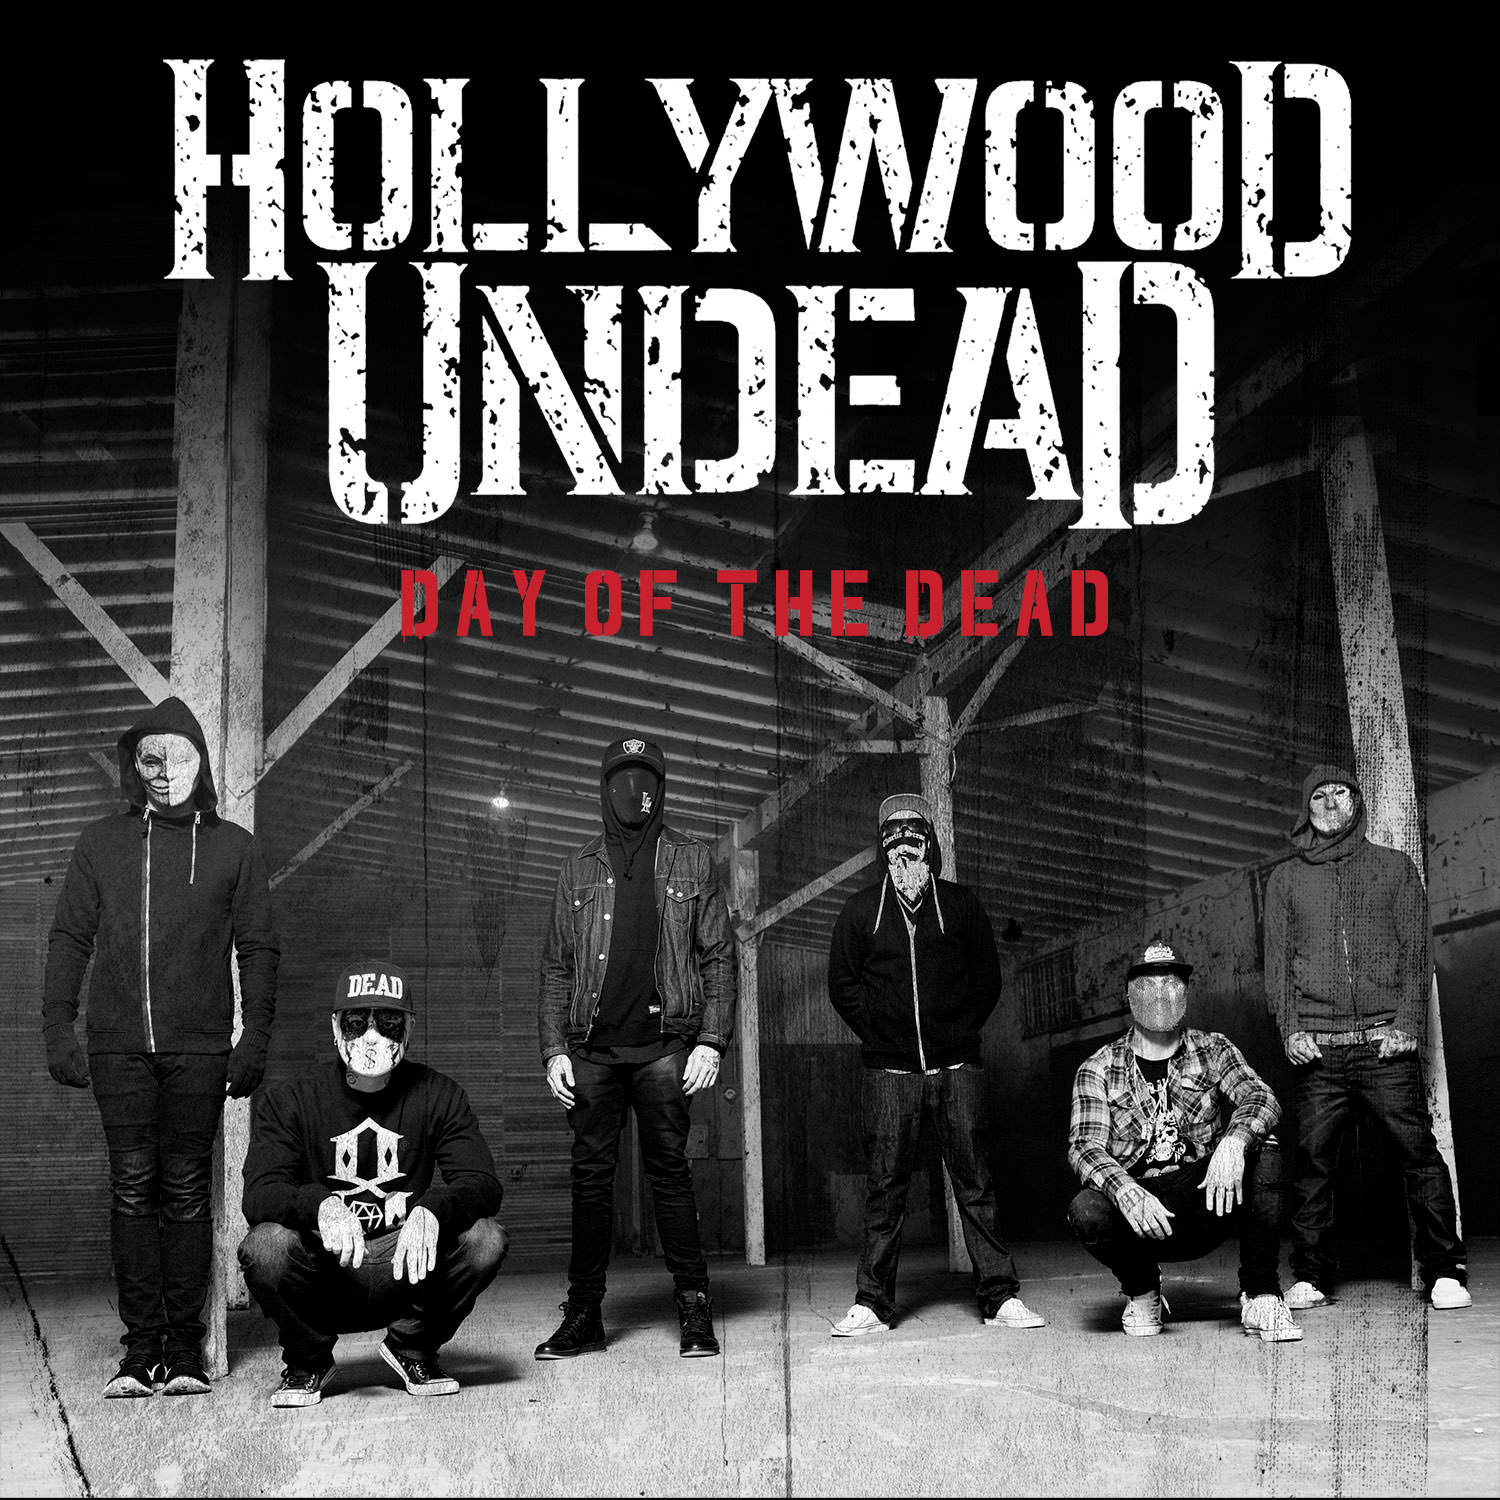 Hollywood Undead - Day Of The Dead {Deluxe Edition} (2015/2017) [HDTracks FLAC 24bit/48kHz]